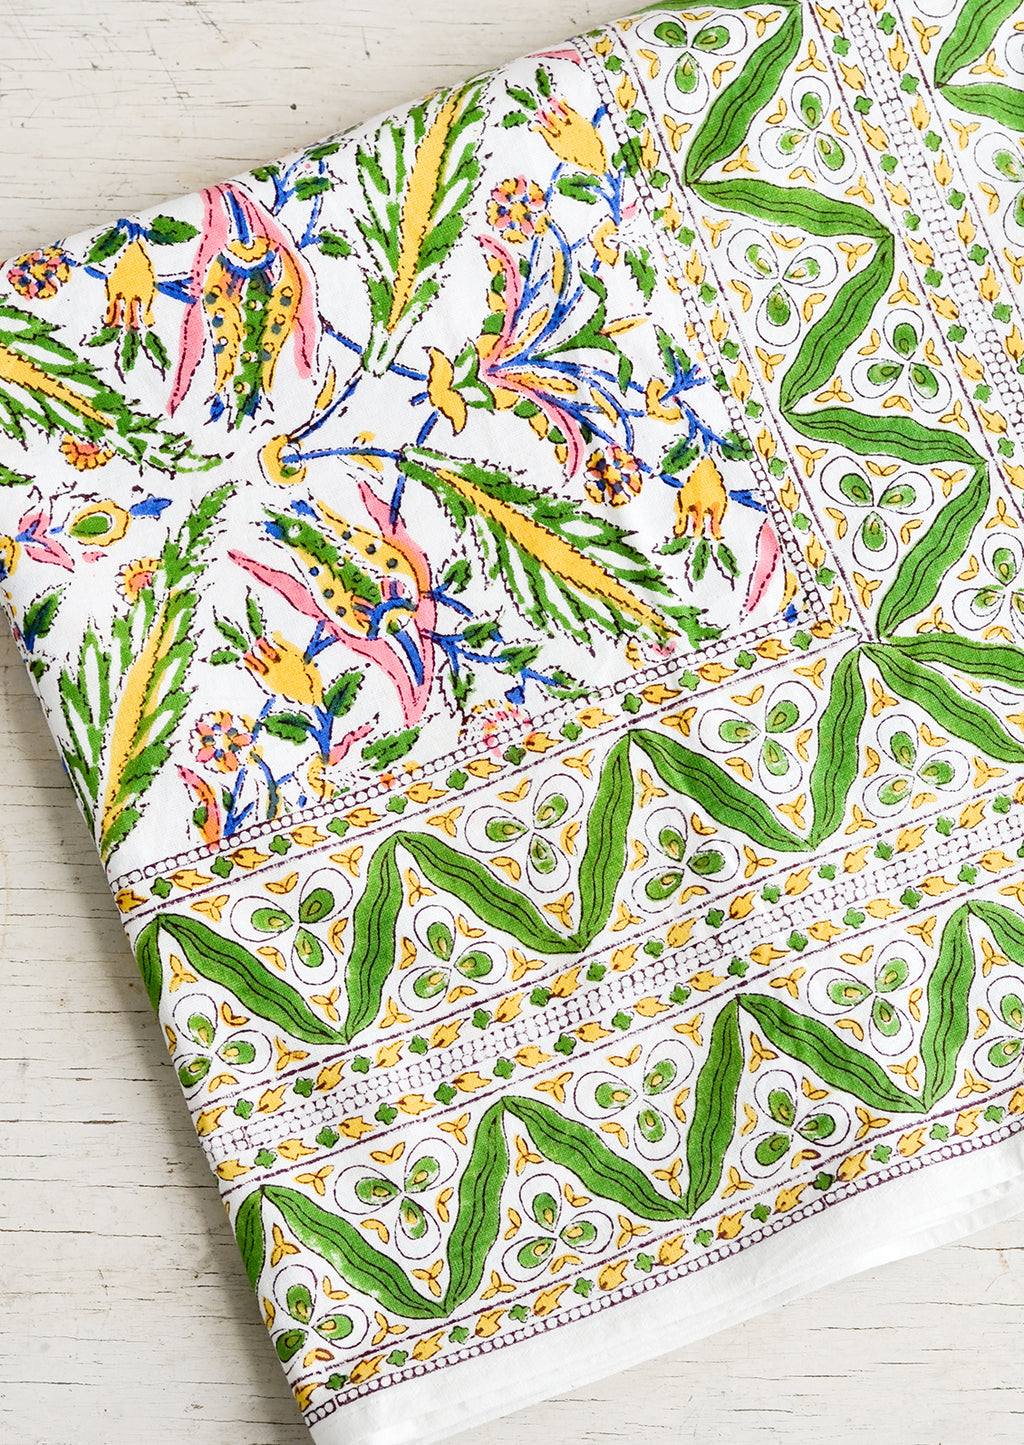 1: A block printed cotton tablecloth in vibrant green, pink and yellow floral pattern.